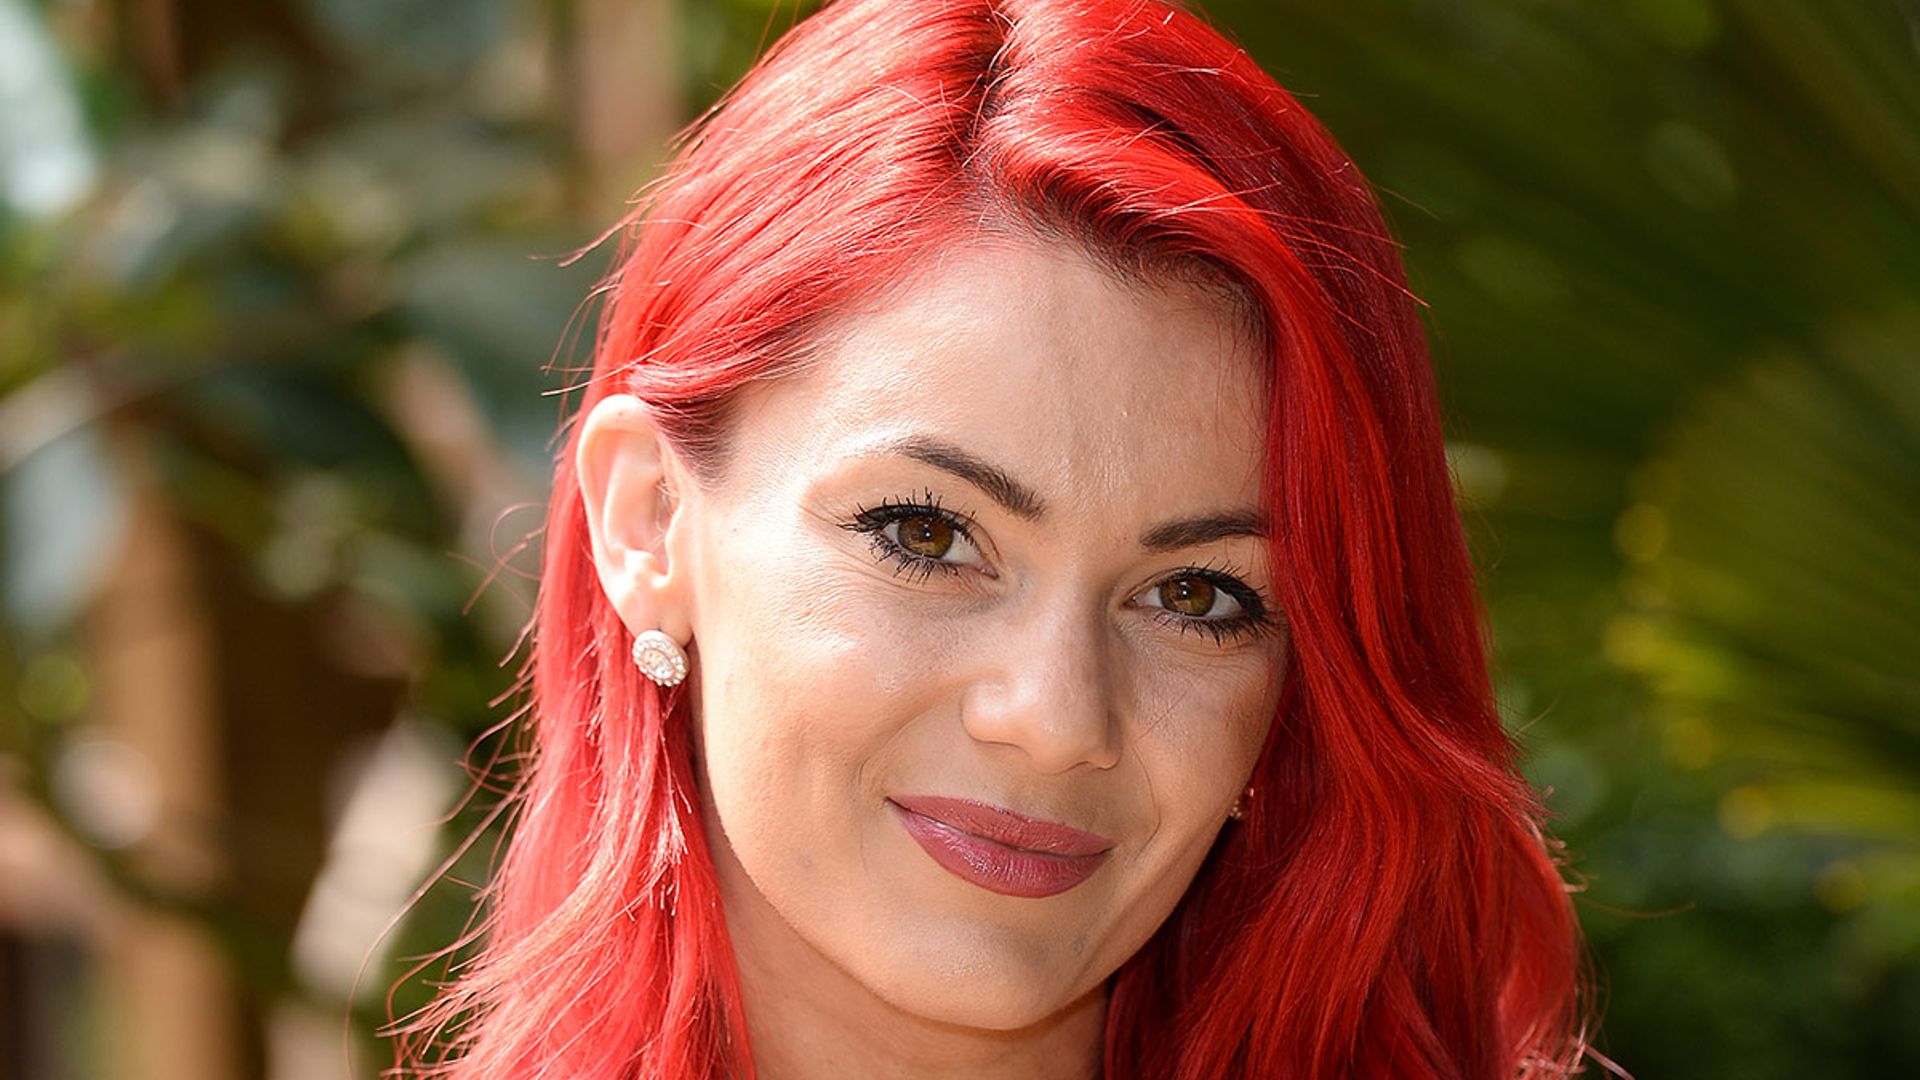 Dianne Buswell looks unrecognisable with short blonde bob after Joe Sugg's haircut